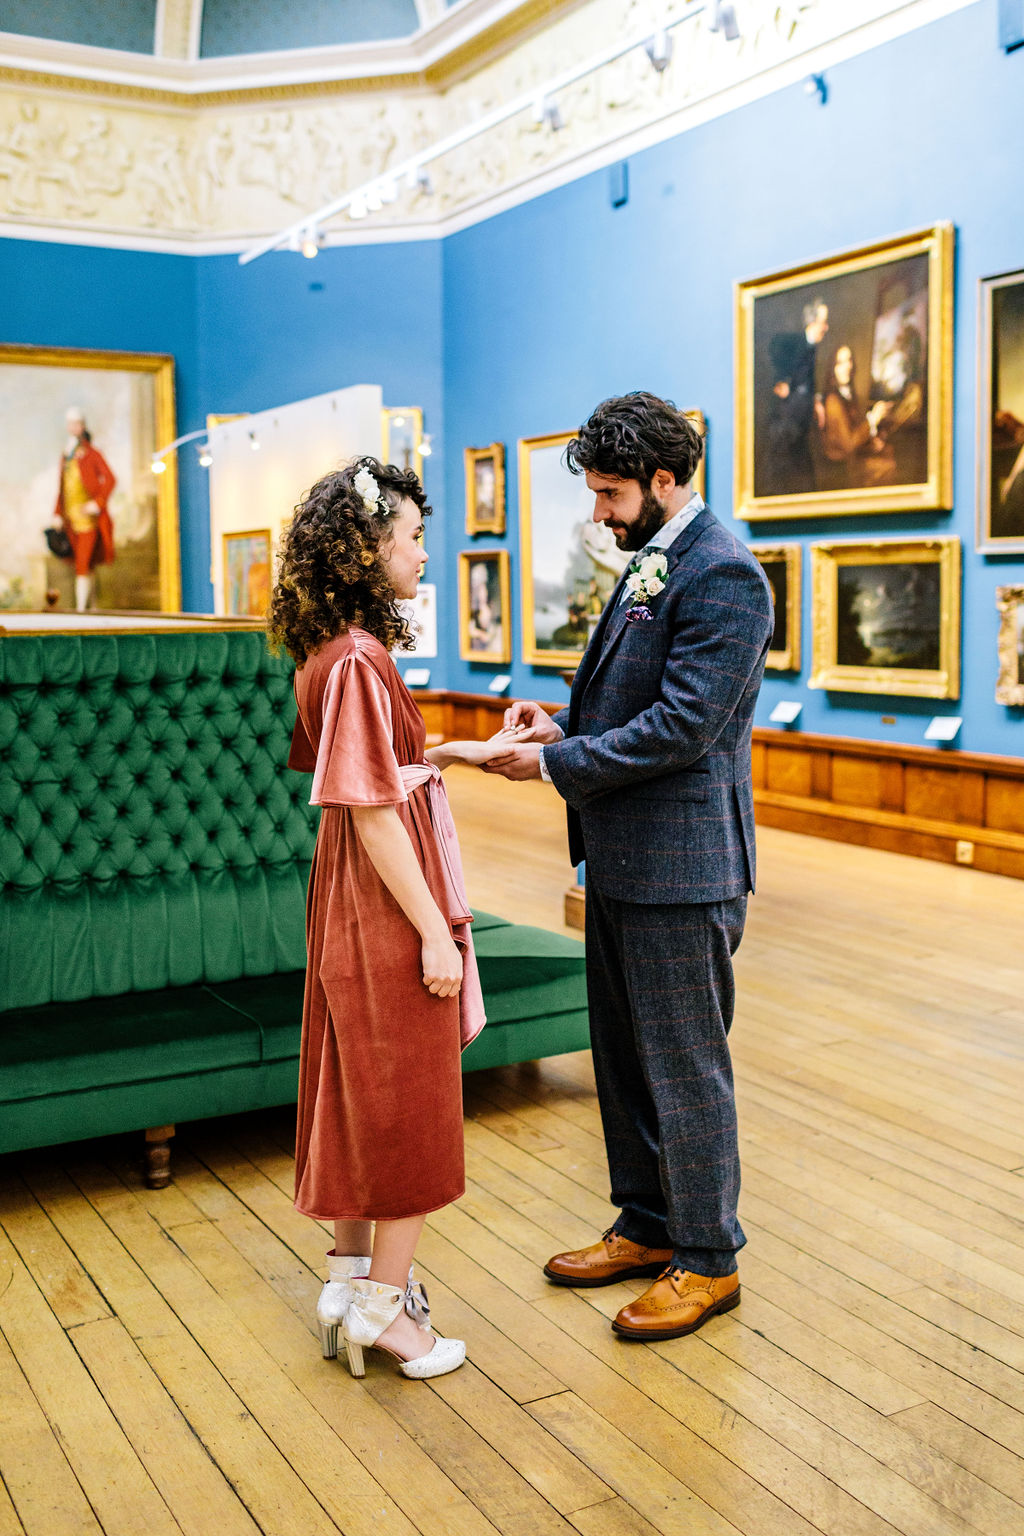 Ceremony in the Upper Gallery